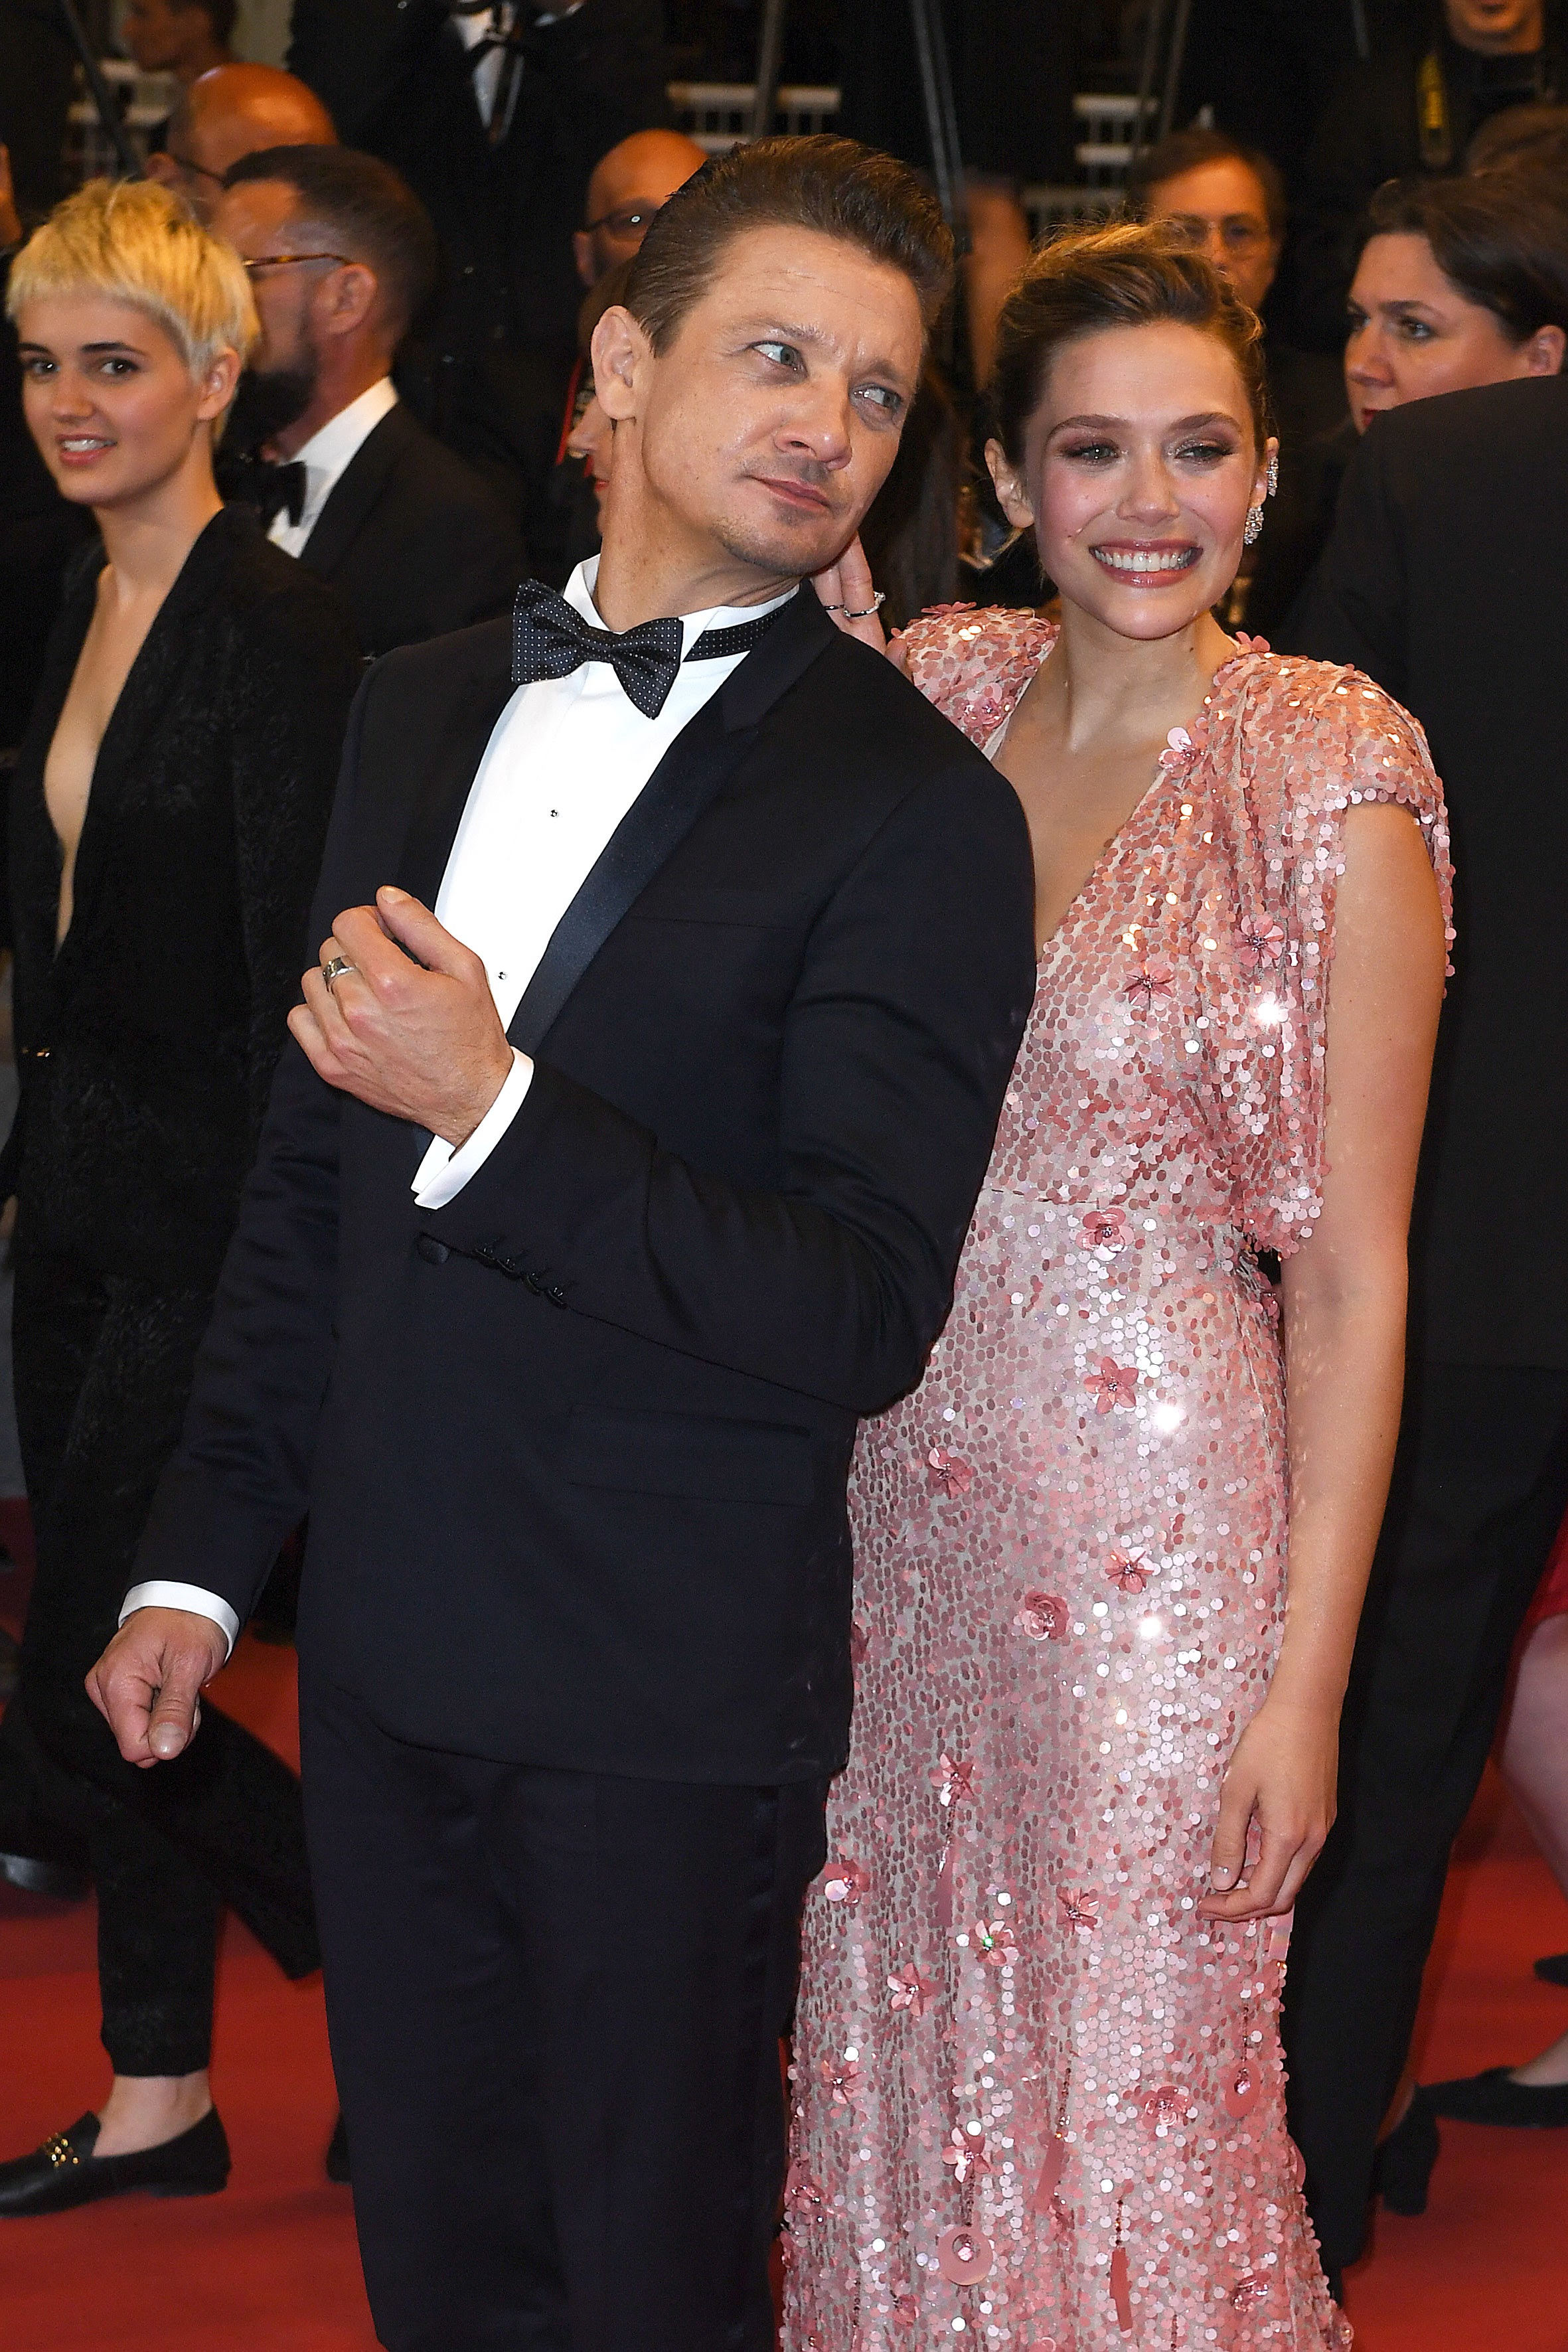 Elizabeth Olsen And Jeremy Renner At The 70th Cannes Film Festival 第70回カンヌ映画祭のエリザベス オルセンとジェレミー レナー Cia Movie News